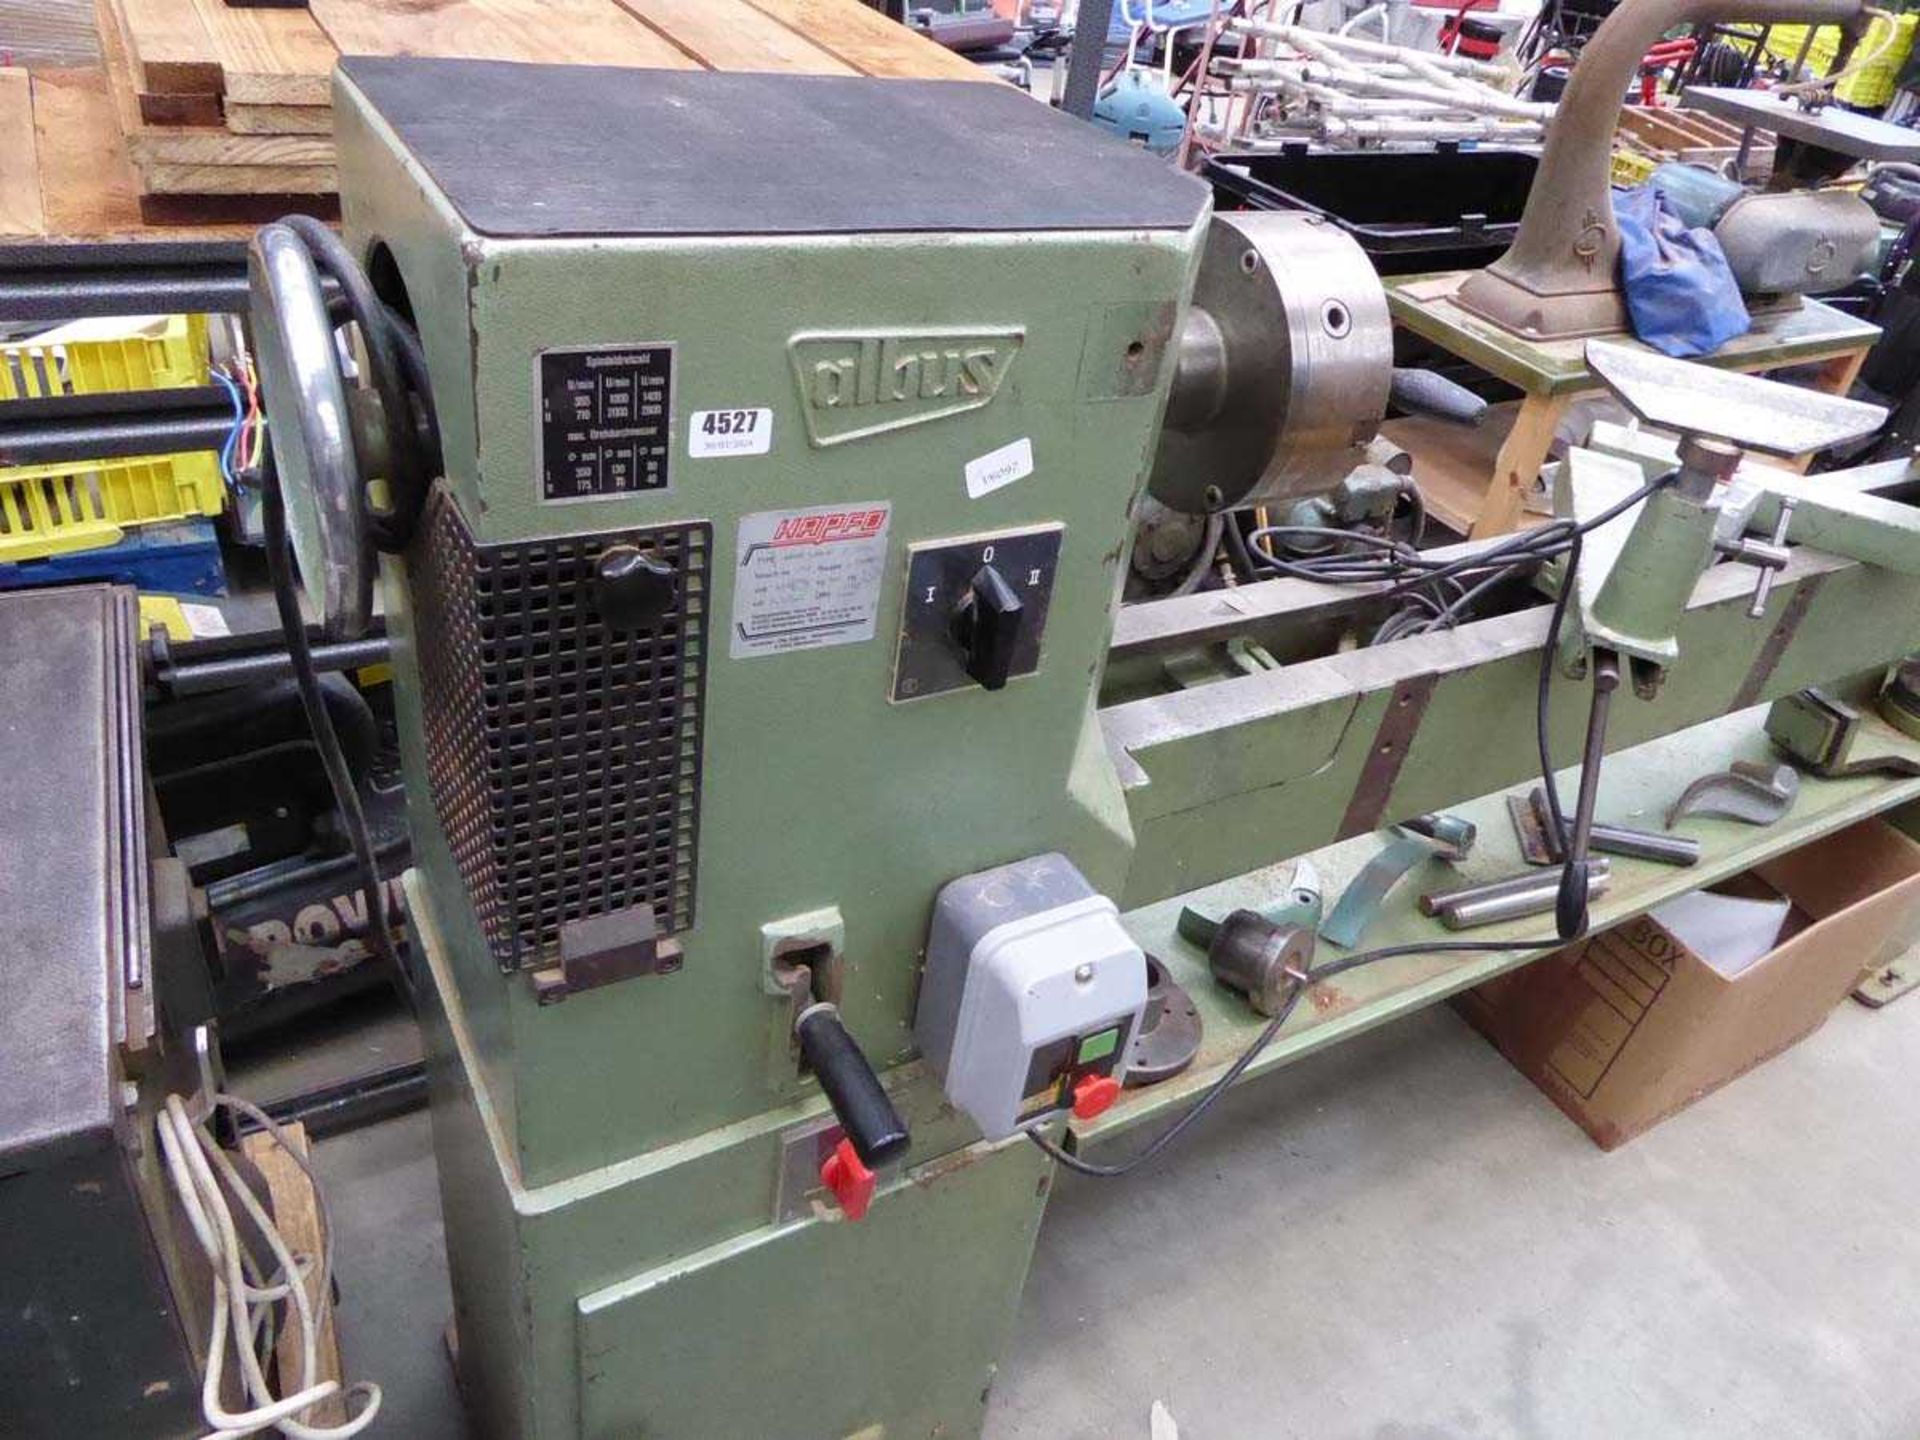 Hapco Albus Type AHDR 130-C woodturning copy lathe with 8ft - 16ft bed and barley twist tooling plus - Image 2 of 6